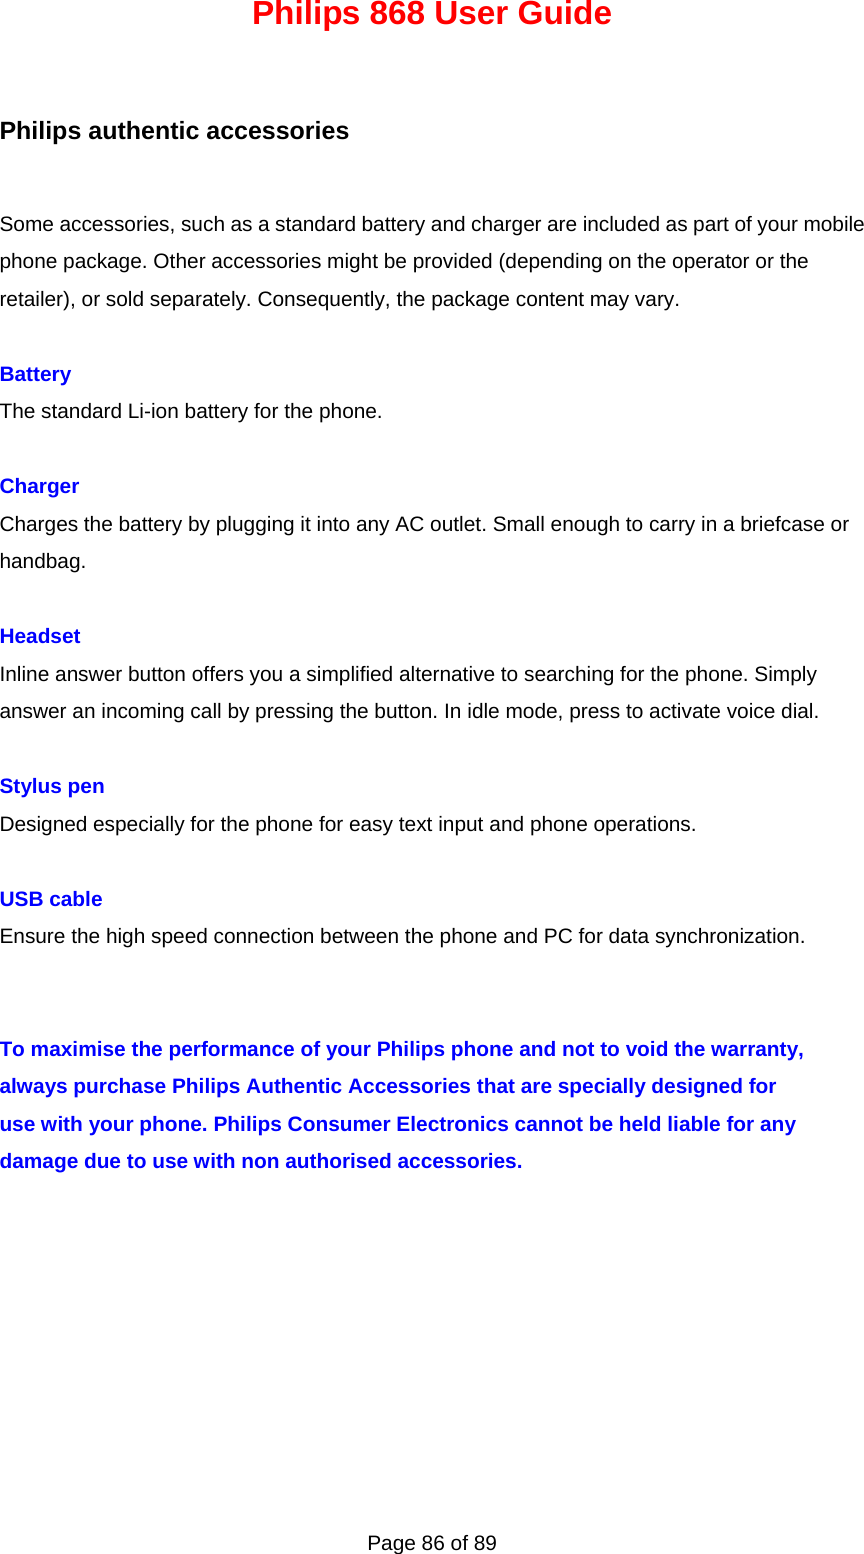 Philips 868 User Guide Page 86 of 89 Philips authentic accessories Some accessories, such as a standard battery and charger are included as part of your mobile phone package. Other accessories might be provided (depending on the operator or the retailer), or sold separately. Consequently, the package content may vary.  Battery The standard Li-ion battery for the phone.  Charger Charges the battery by plugging it into any AC outlet. Small enough to carry in a briefcase or handbag.  Headset Inline answer button offers you a simplified alternative to searching for the phone. Simply answer an incoming call by pressing the button. In idle mode, press to activate voice dial.  Stylus pen Designed especially for the phone for easy text input and phone operations.  USB cable Ensure the high speed connection between the phone and PC for data synchronization.   To maximise the performance of your Philips phone and not to void the warranty, always purchase Philips Authentic Accessories that are specially designed for use with your phone. Philips Consumer Electronics cannot be held liable for any damage due to use with non authorised accessories.         